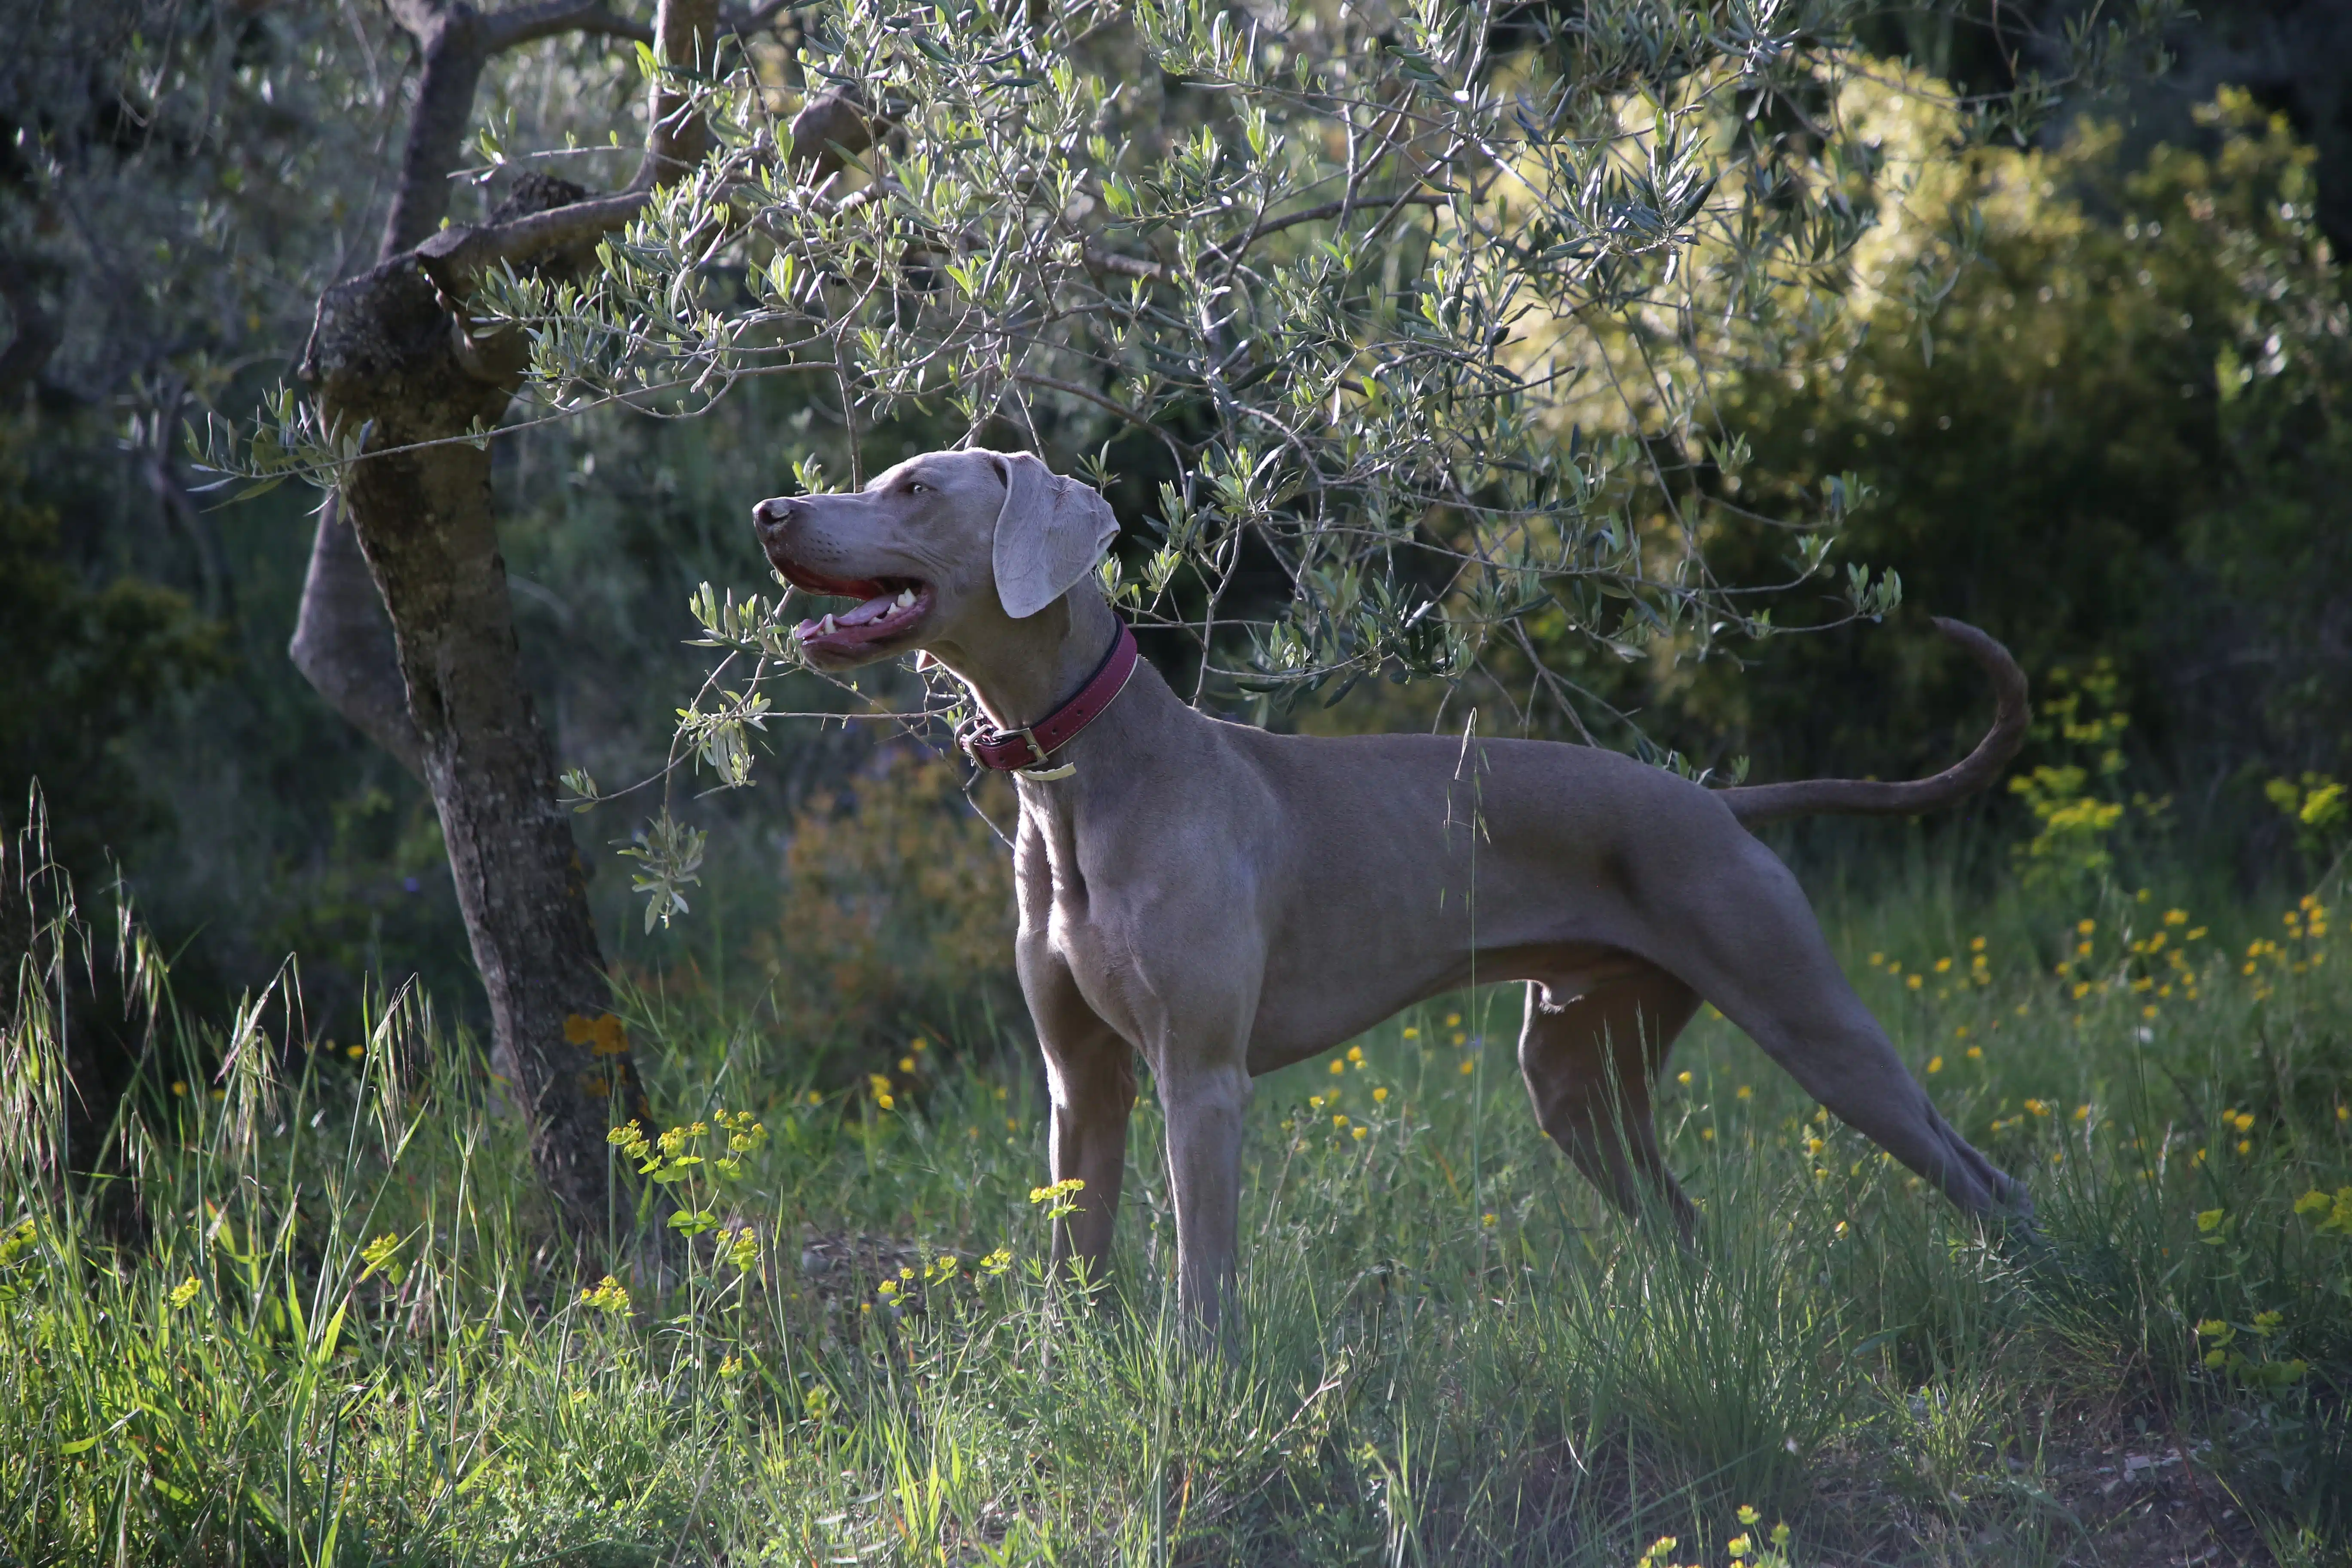 As the largest dog breed in the world, Great Danes love the outdoors, like this grey Great Dane who is enjoying the fresh air.